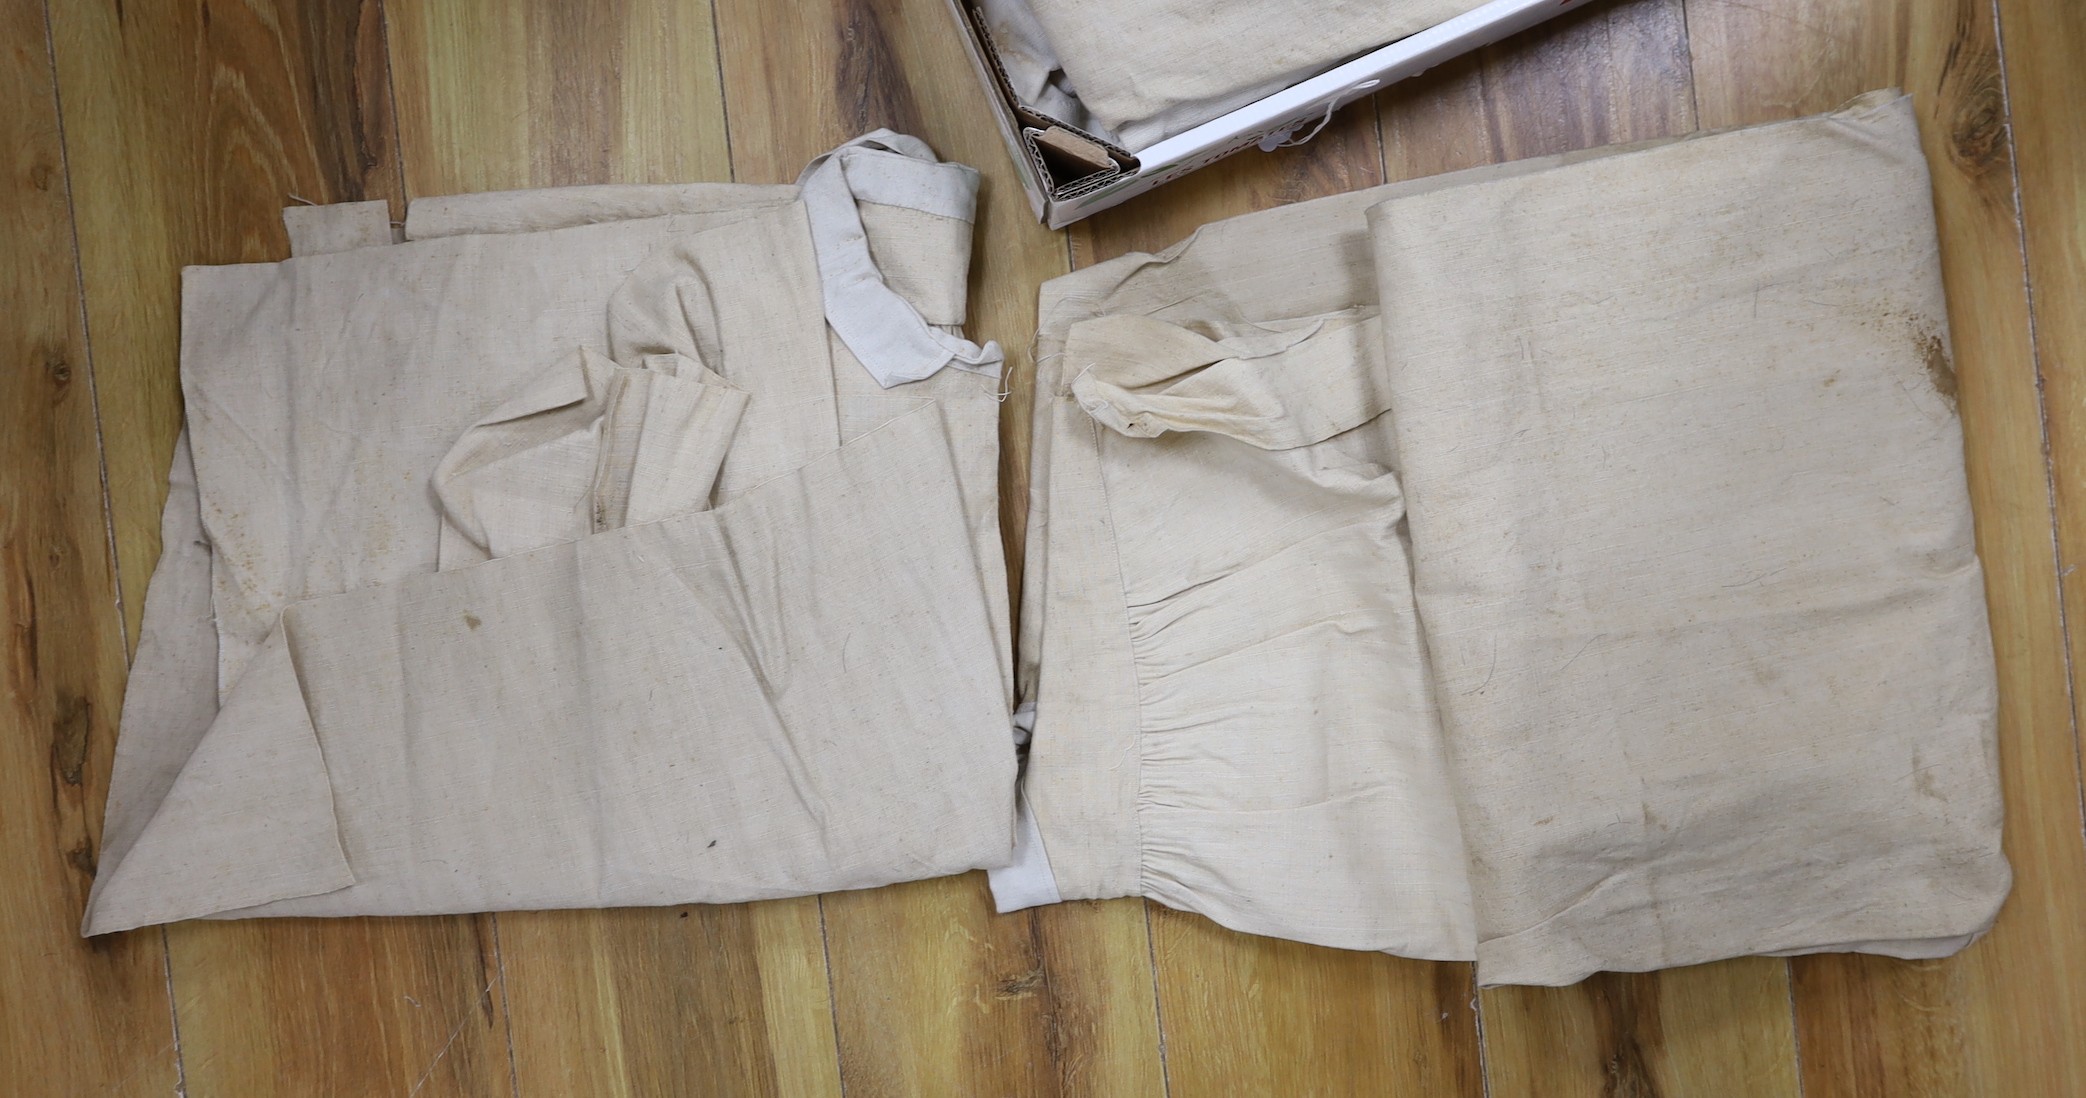 Twelve French provincial linen farm workers' shirts (5 unfinished)